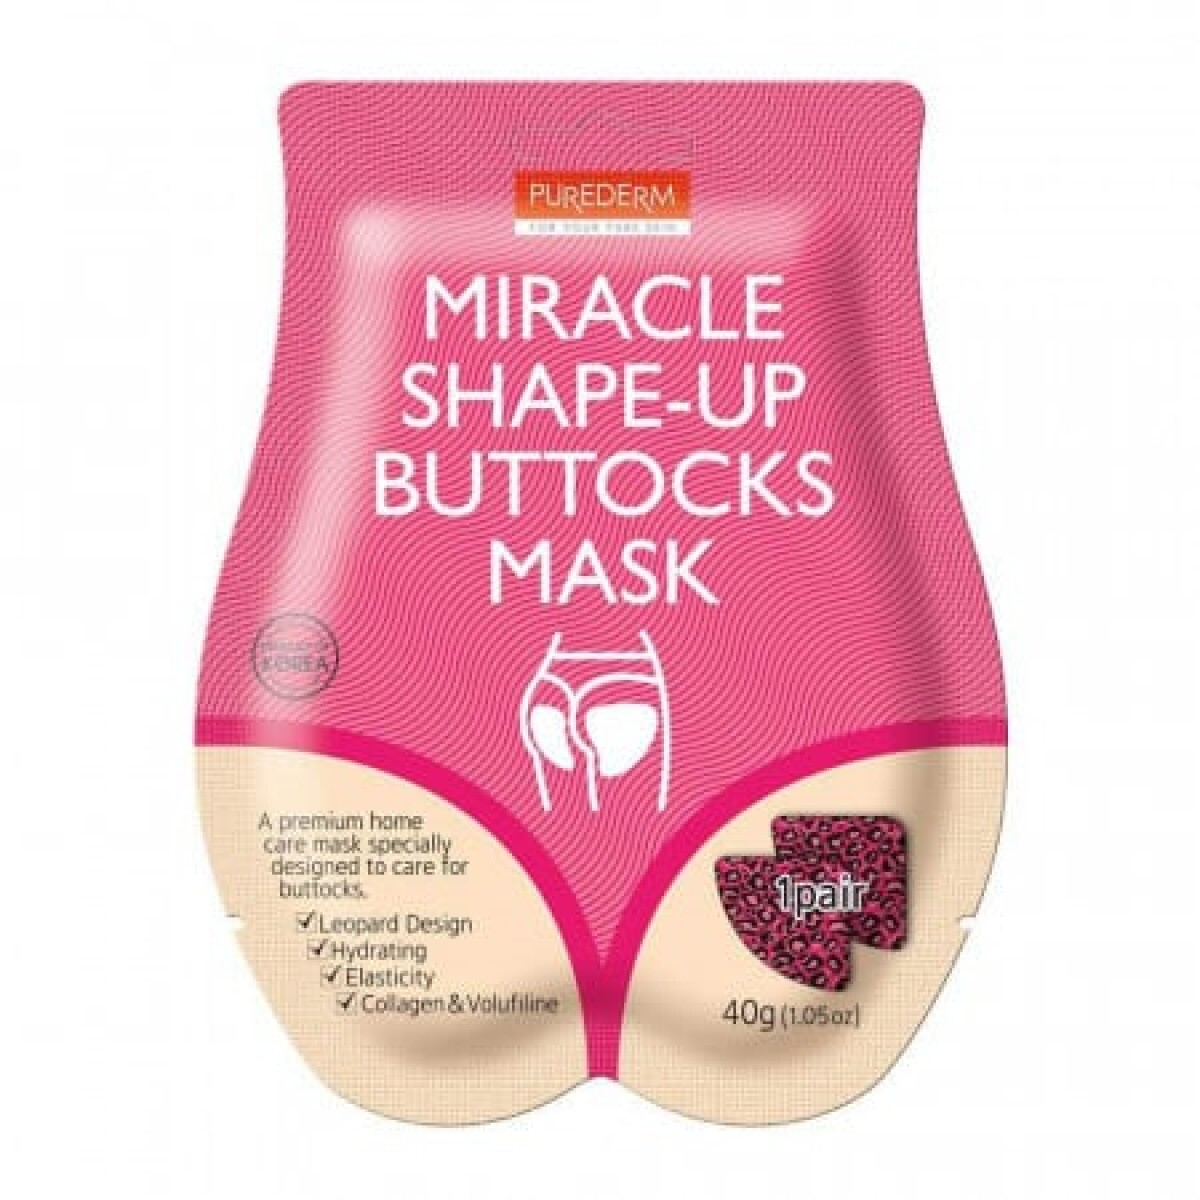 Purederm Miracle Shape Up Buttocks Mask 